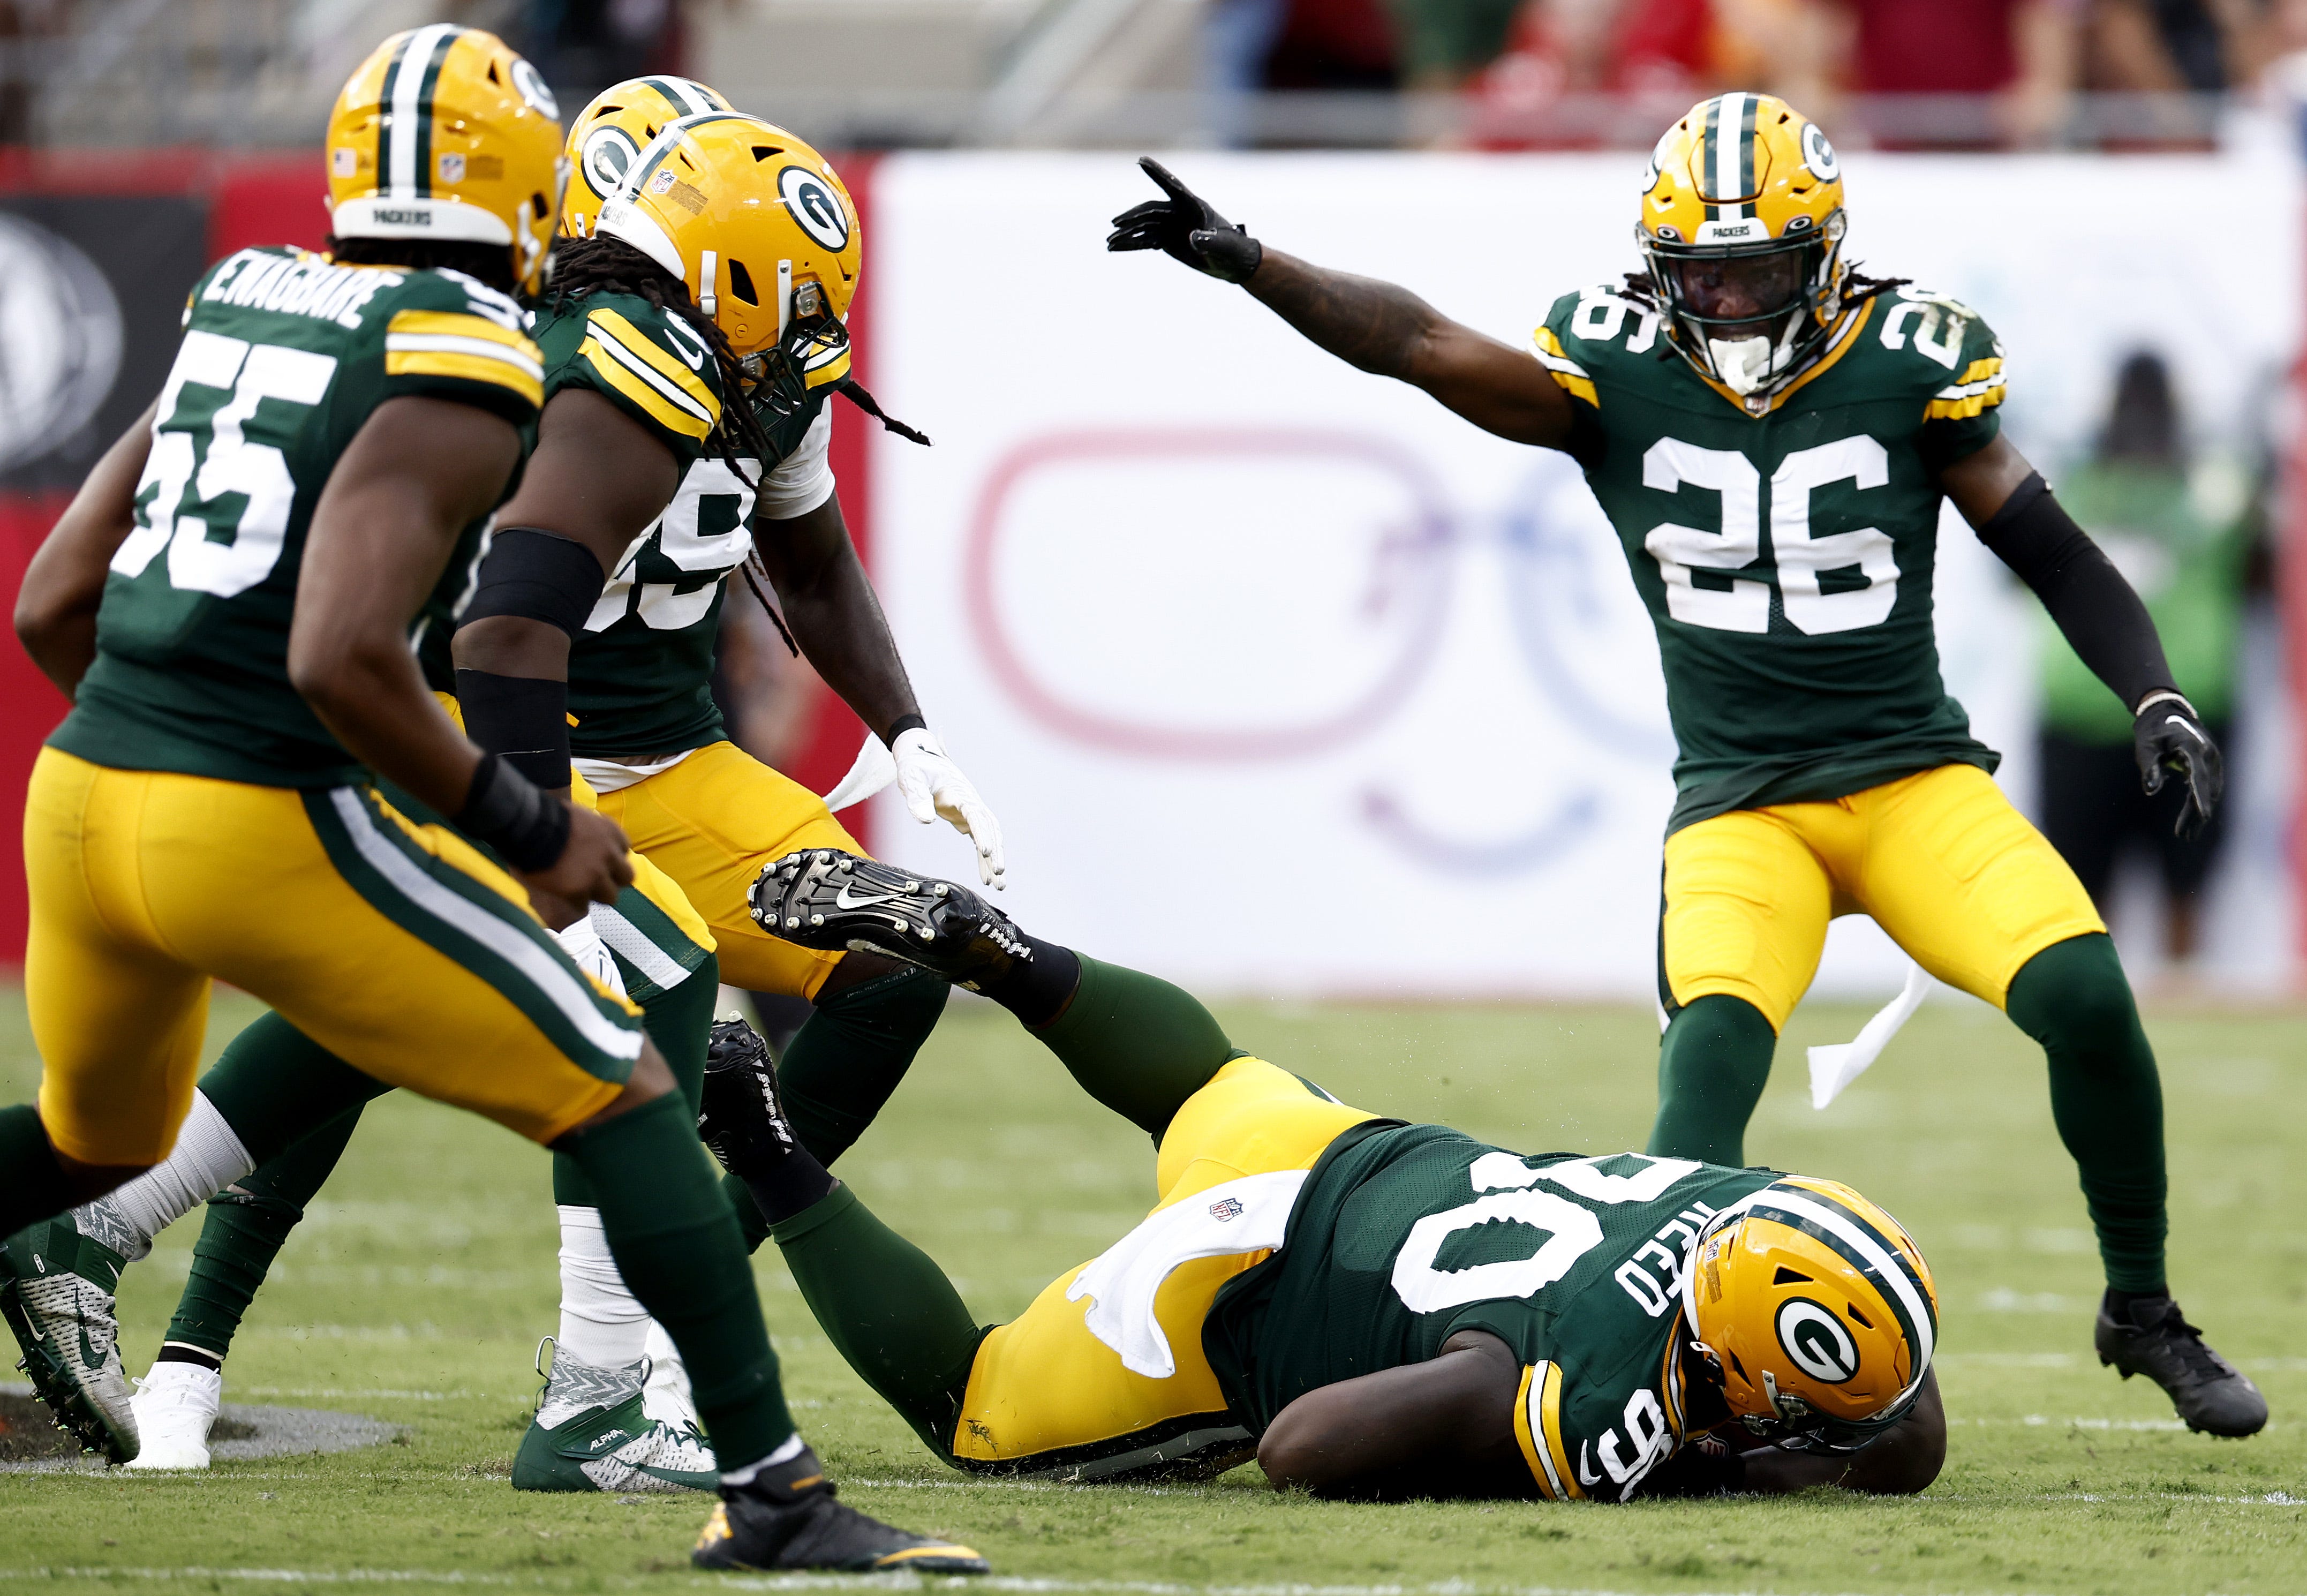 Jarran Reed (90) of the Green Bay Packers recovers a fumble against the Tampa Bay Buccaneers during the third quarter on Sept. 25, 2022, at Raymond James Stadium in Tampa, Florida.